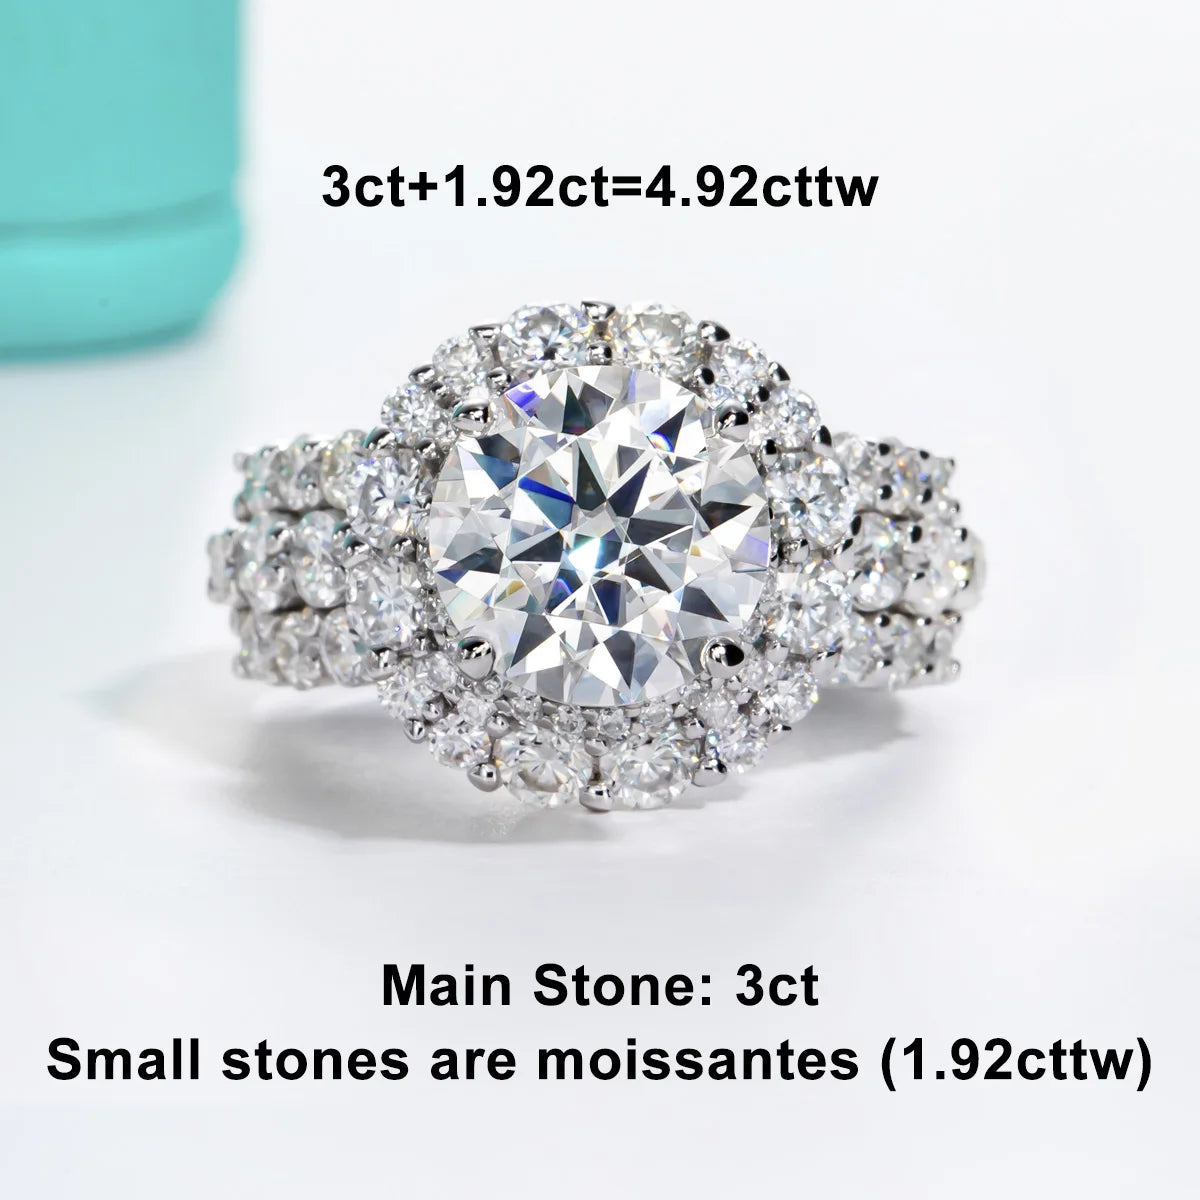 Halo Engagement Moissanite Rings. Total 6.92 Carat. Luxury Jewelry.